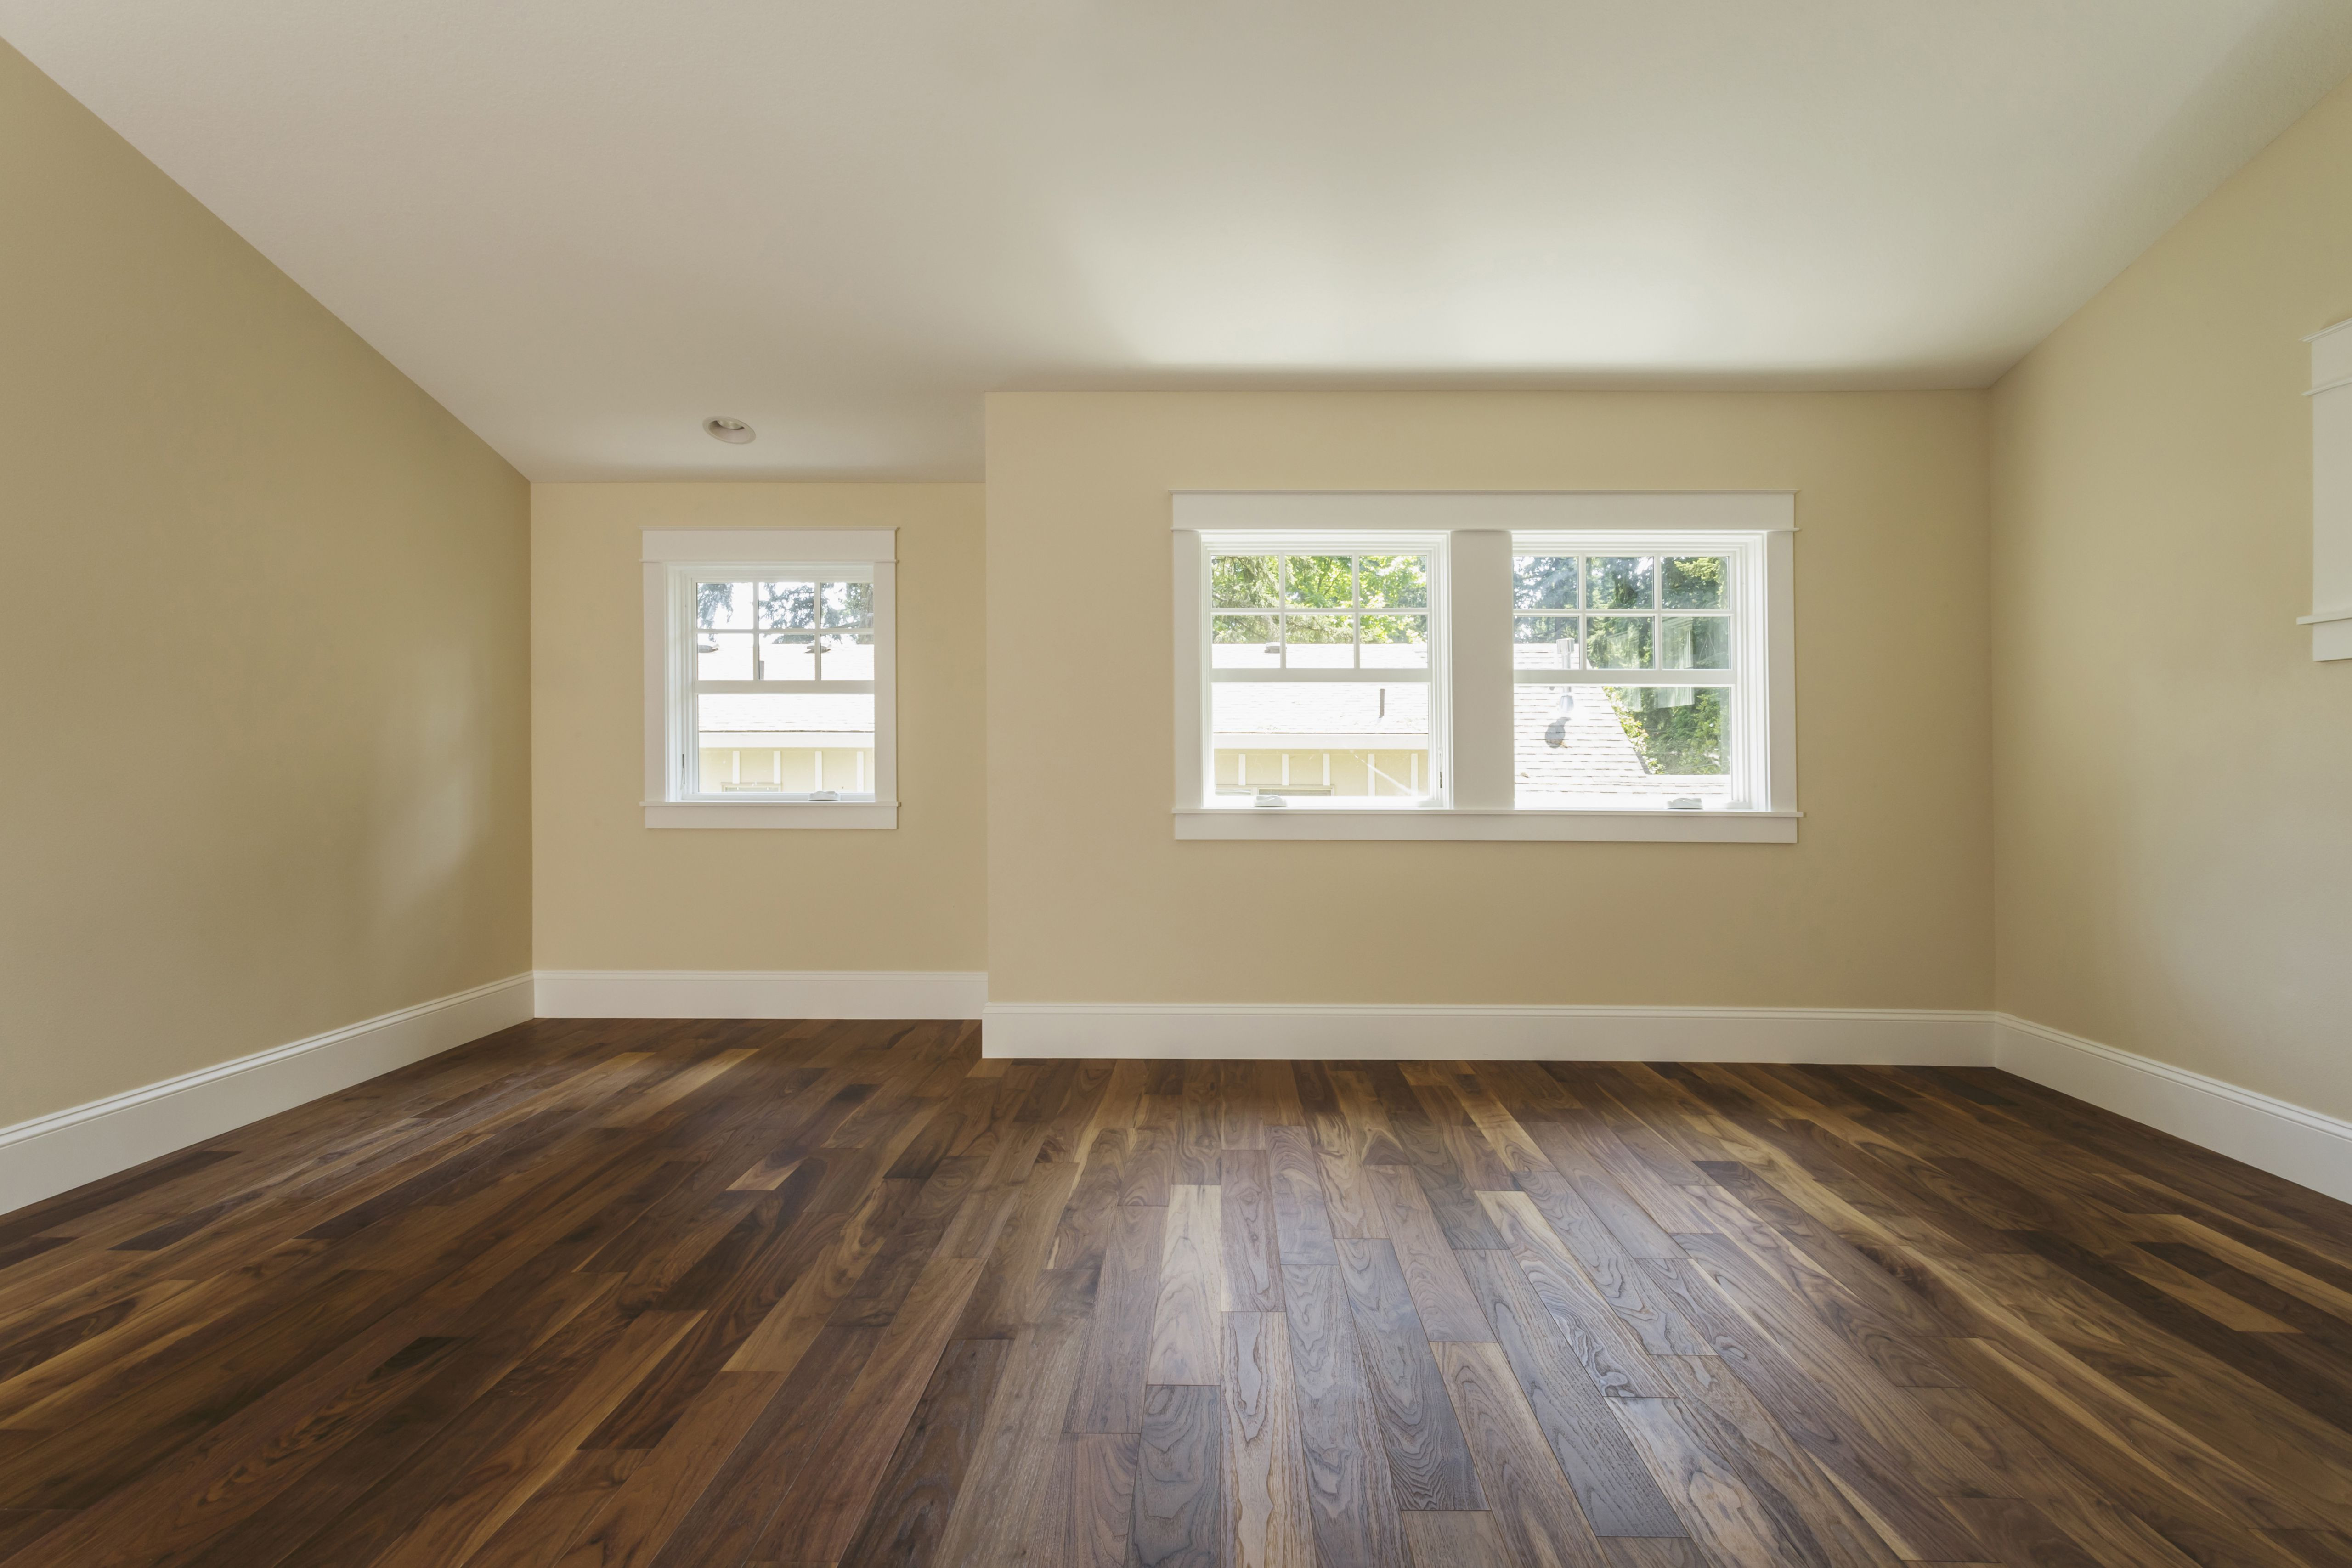 26 Perfect Direction Of Laying Hardwood Floors 2024 free download direction of laying hardwood floors of its easy and fast to install plank vinyl flooring with regard to wooden floor in empty bedroom 482143001 588bd5f45f9b5874eebd56e9